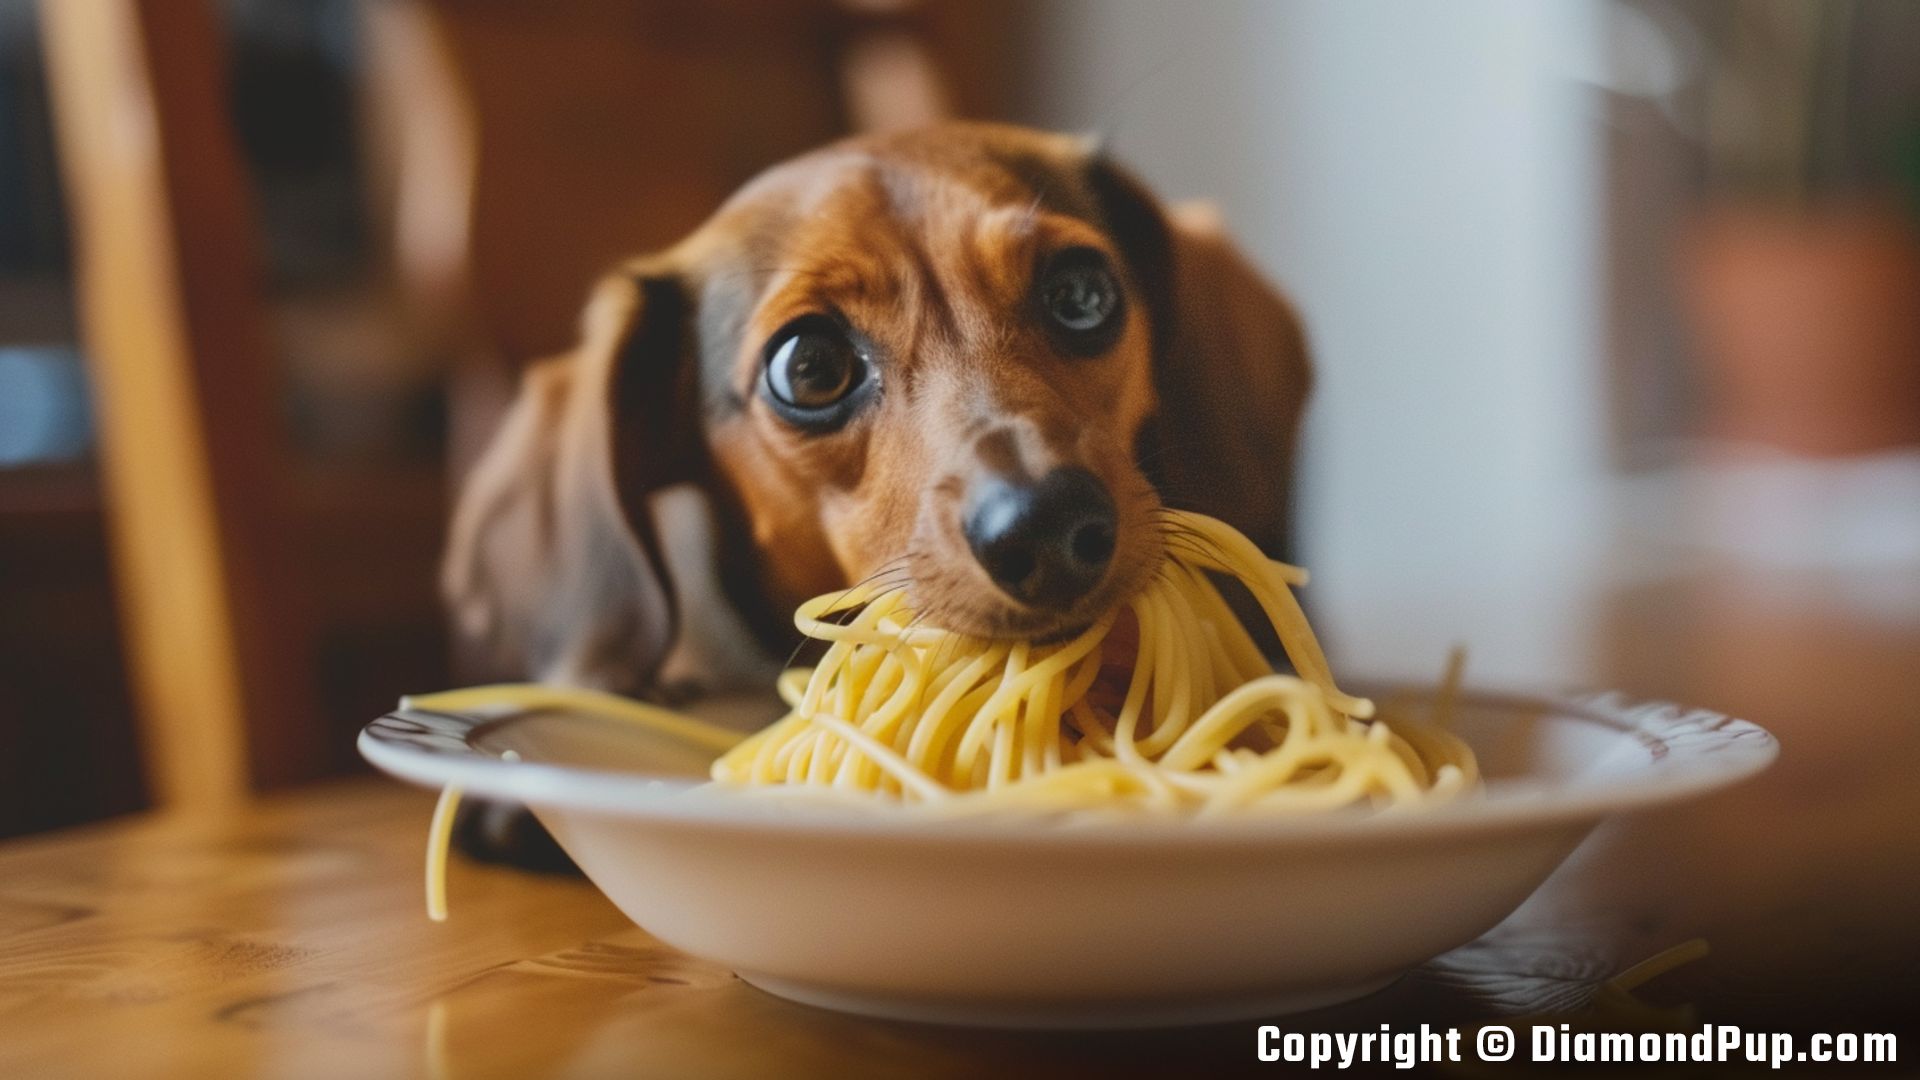 Photo of an Adorable Dachshund Eating Pasta